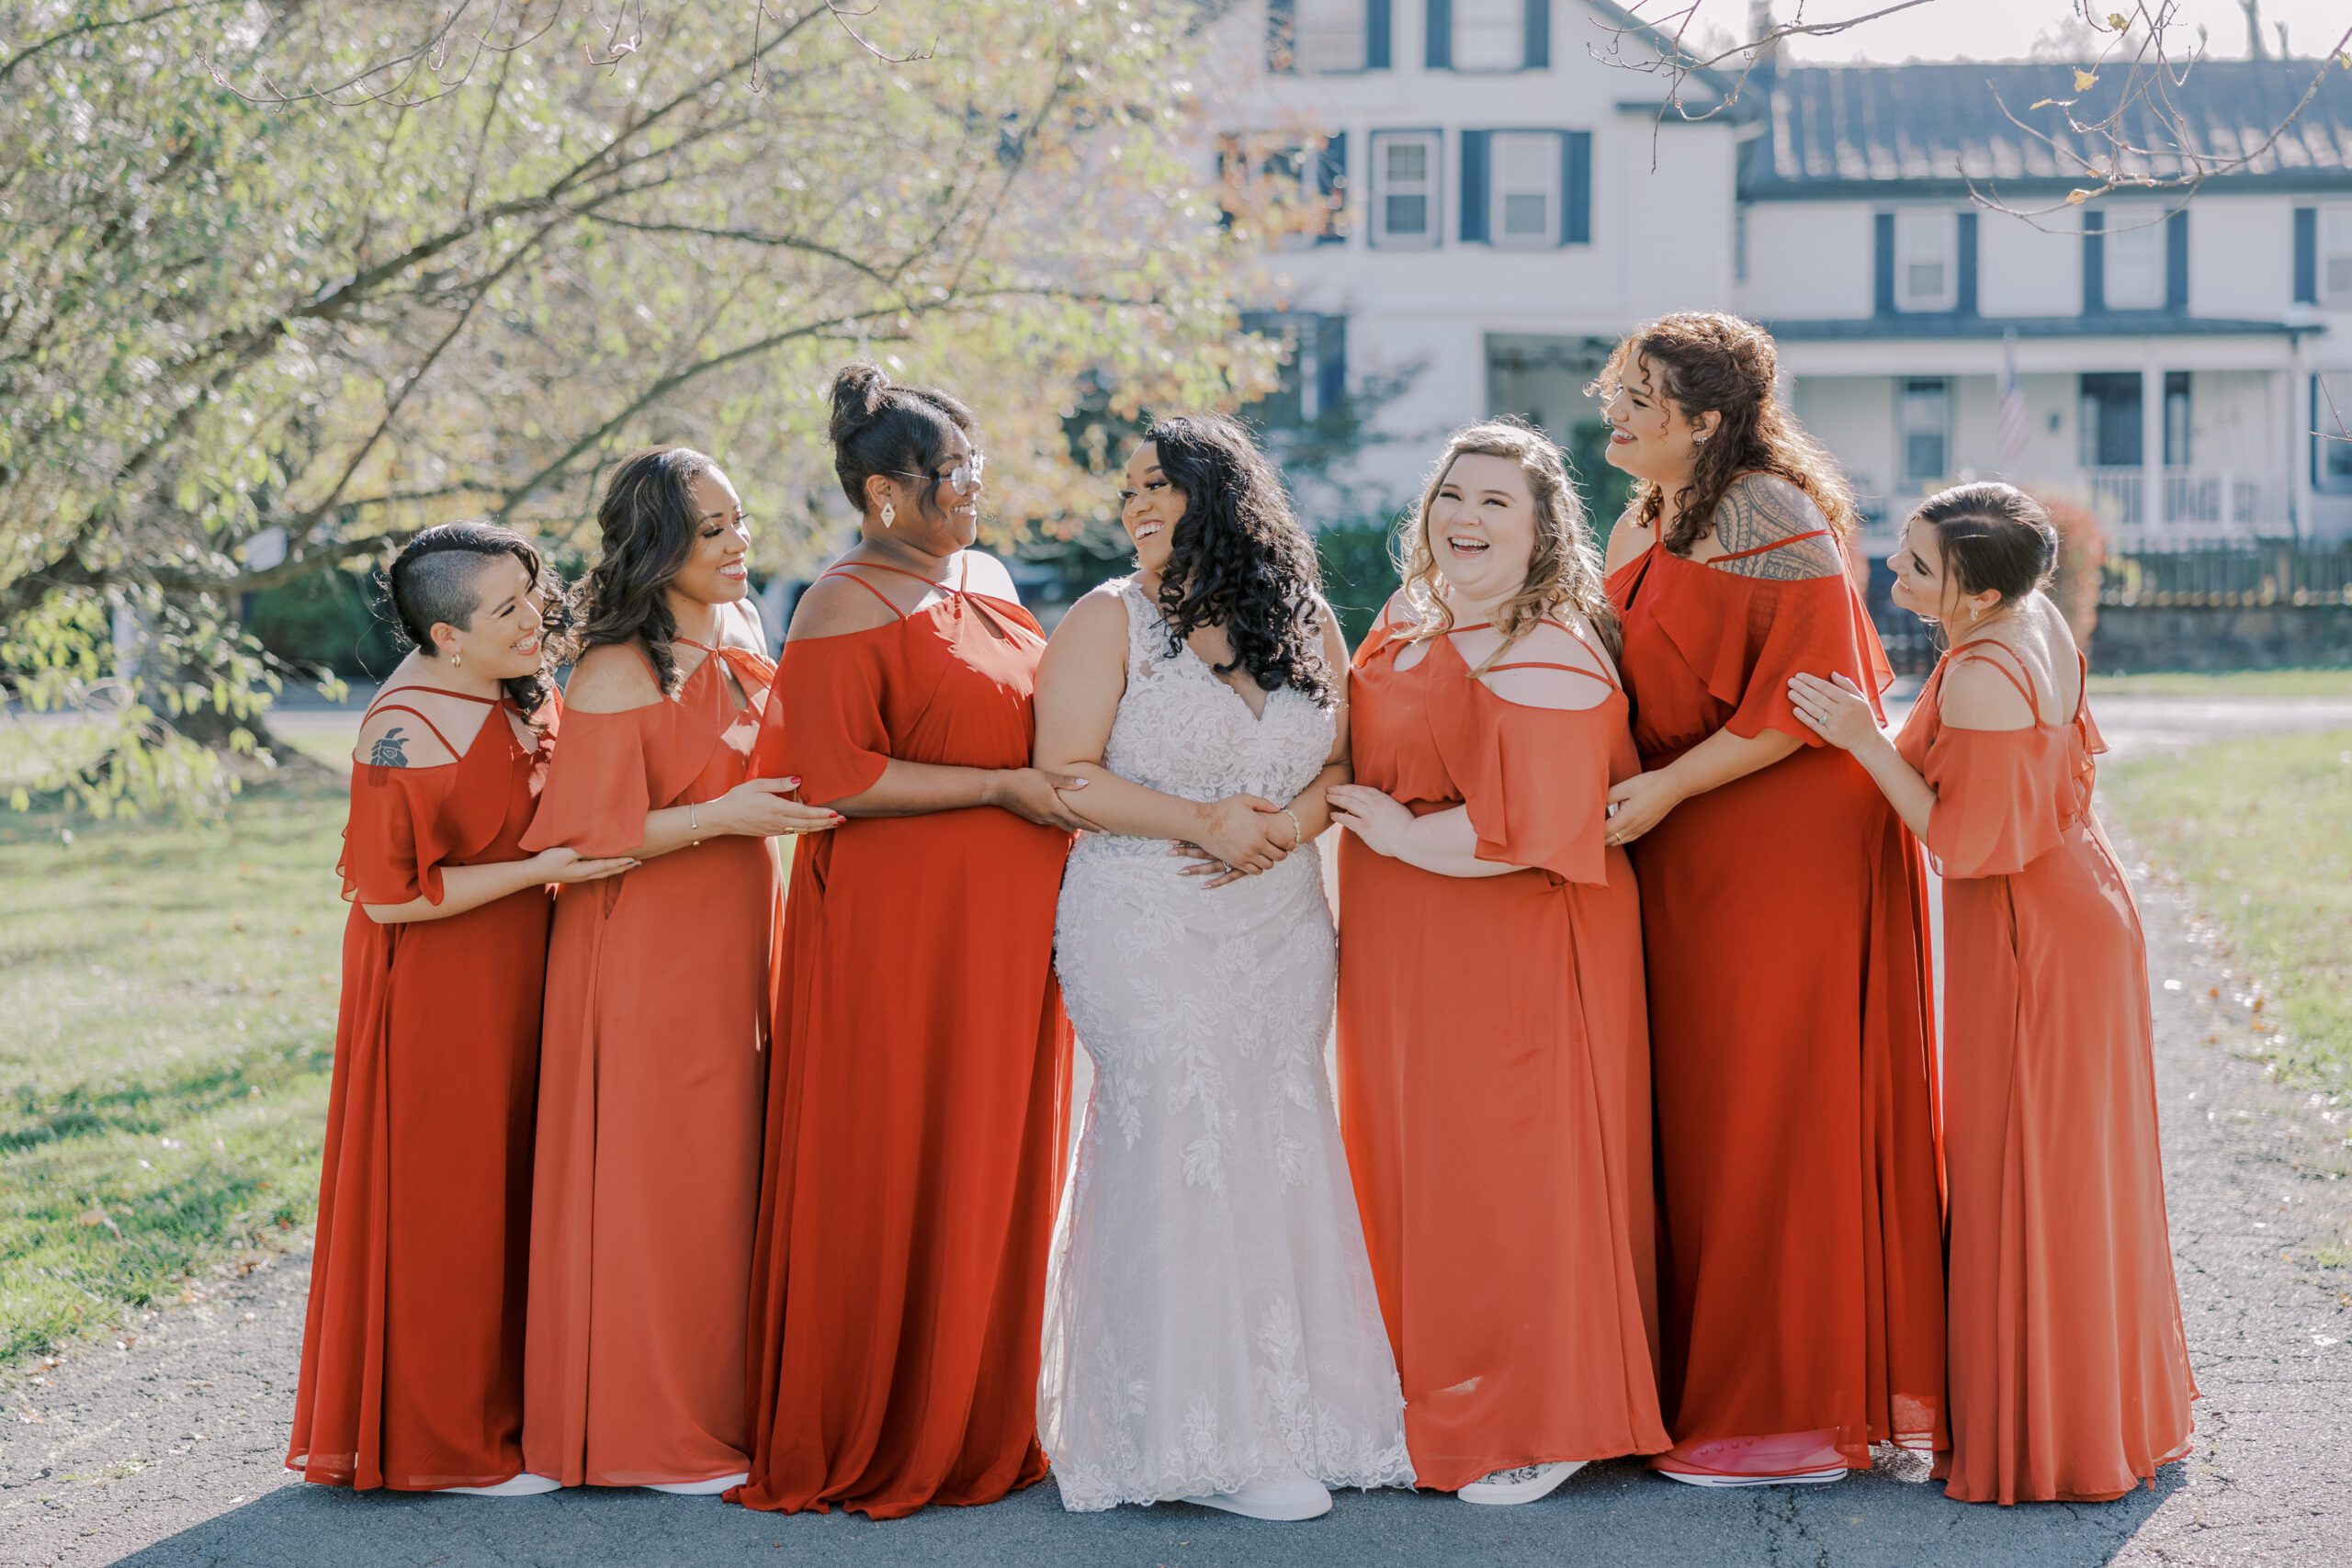 Bride and her bridesmaids arm in arm, smiling and laughing at each other